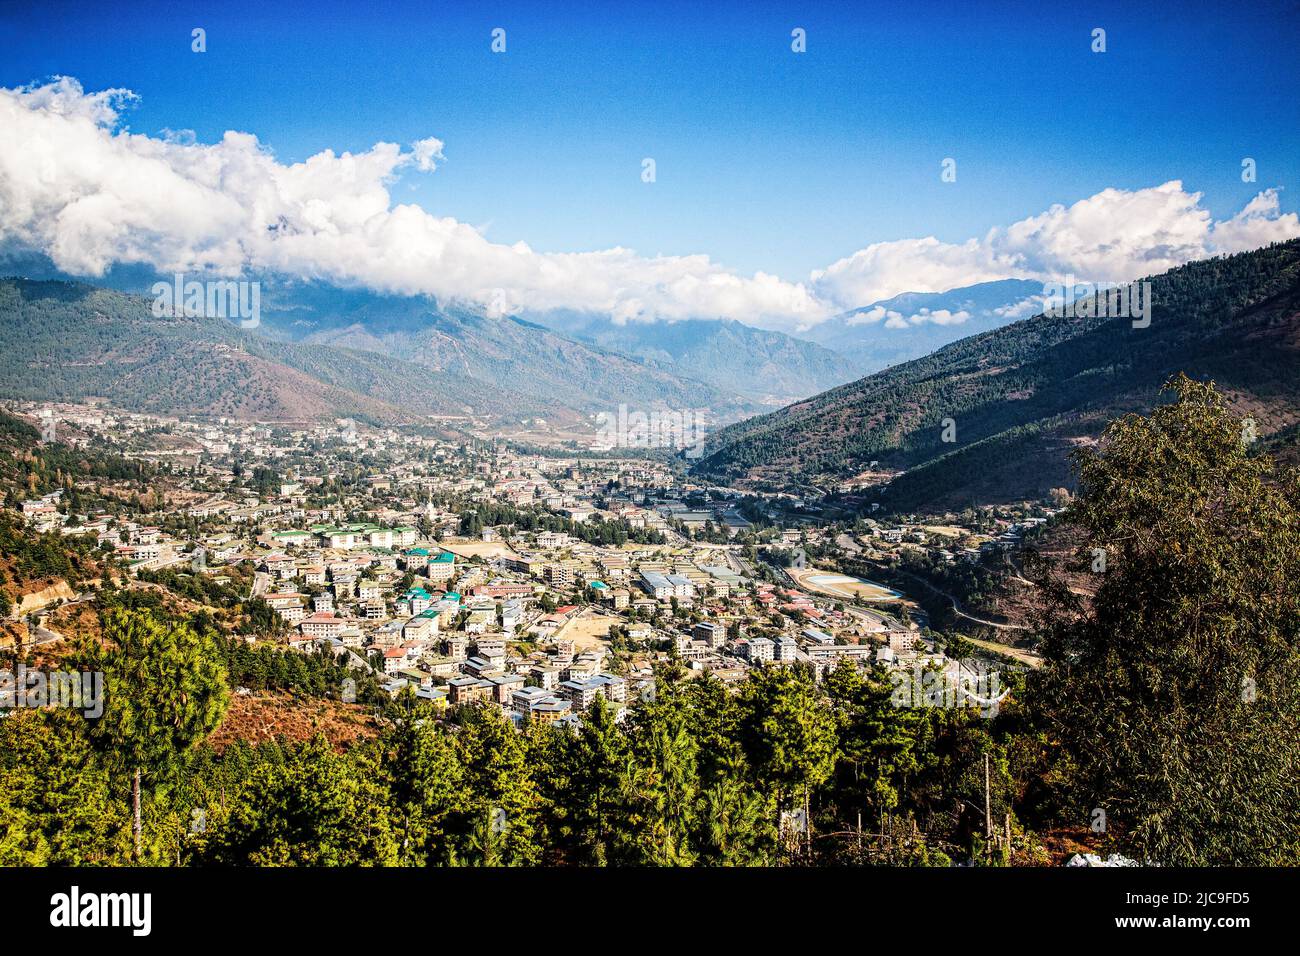 The capital city Thimphu sits in a mountain valley in Bhutan. Stock Photo